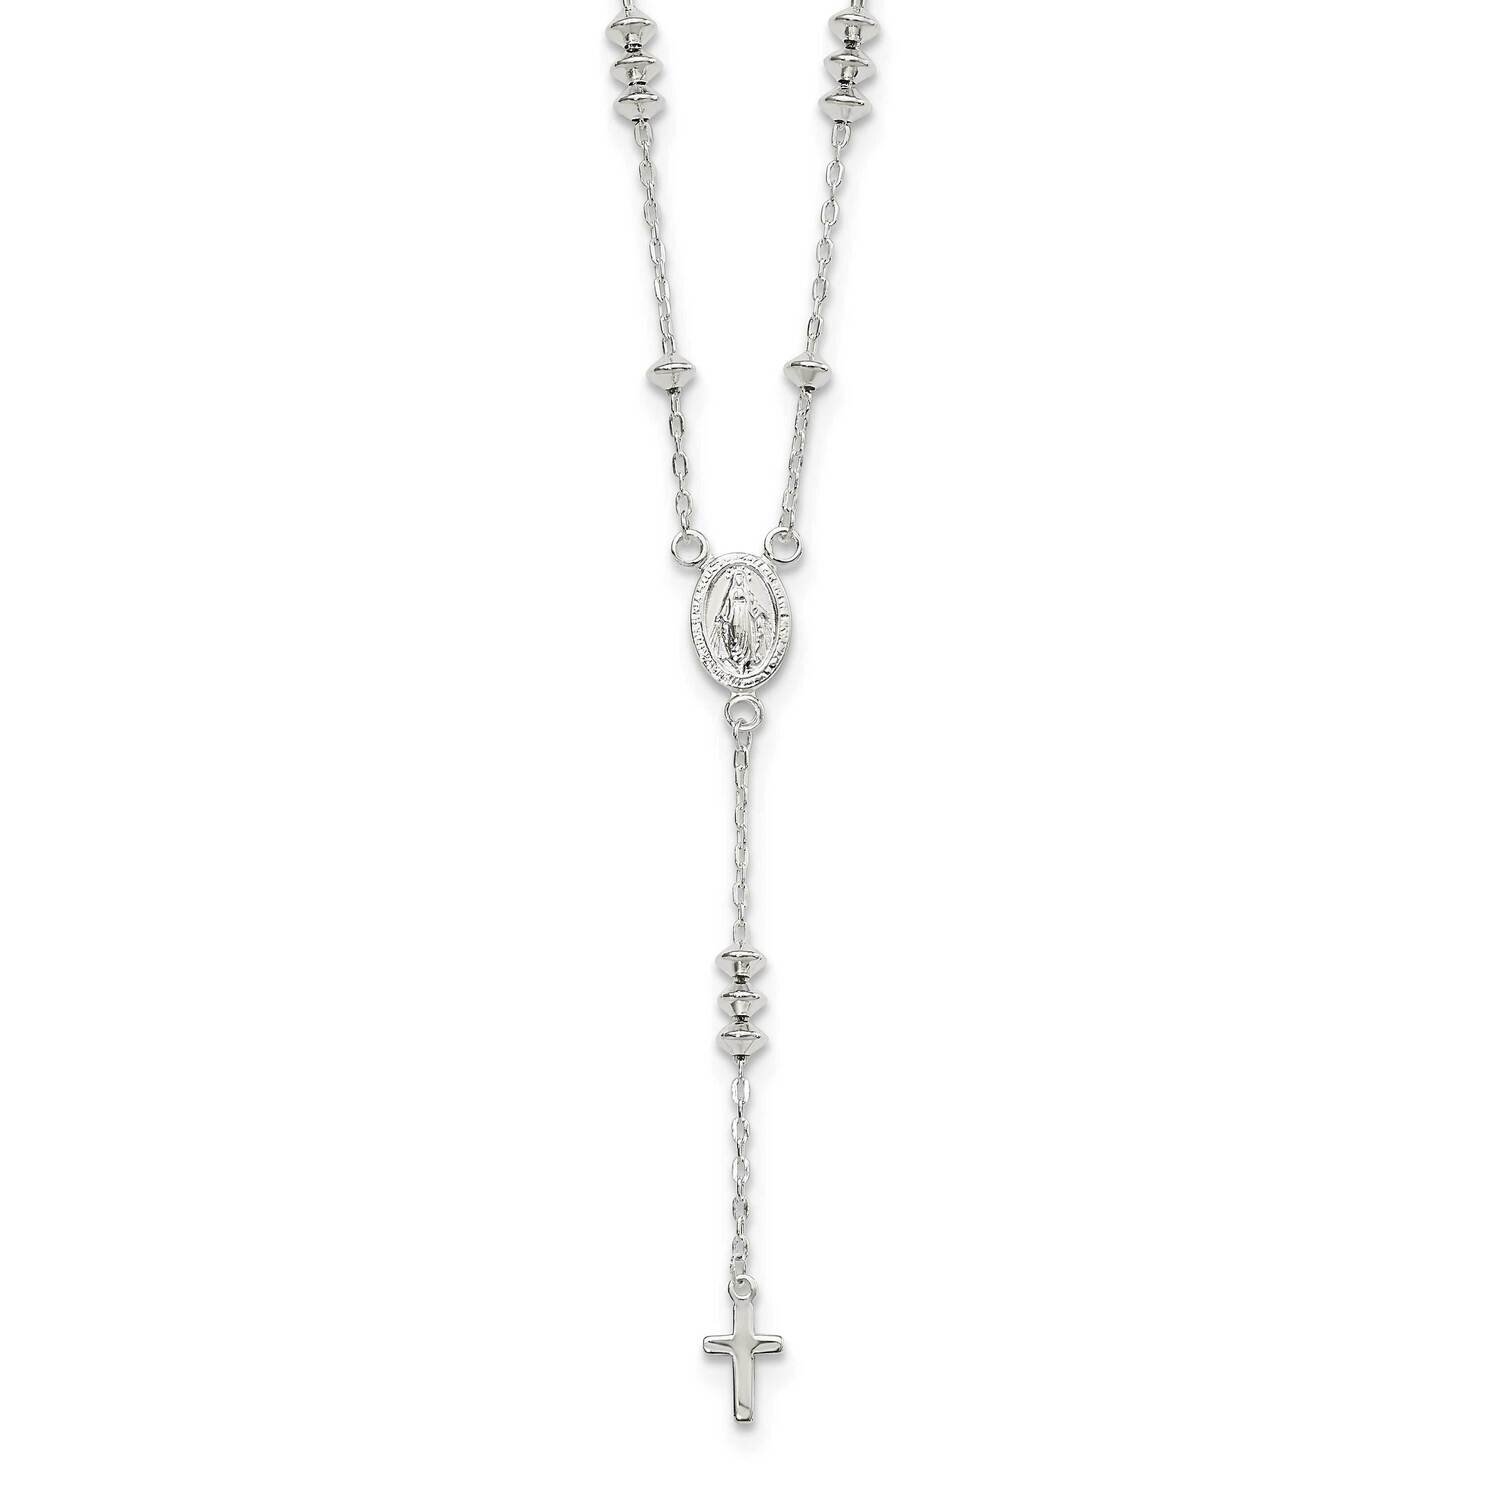 Mary and Cross Y-Drop 1.75 Inch Extender Necklace 19.75 Inch Sterling Silver Polished QG6043-18